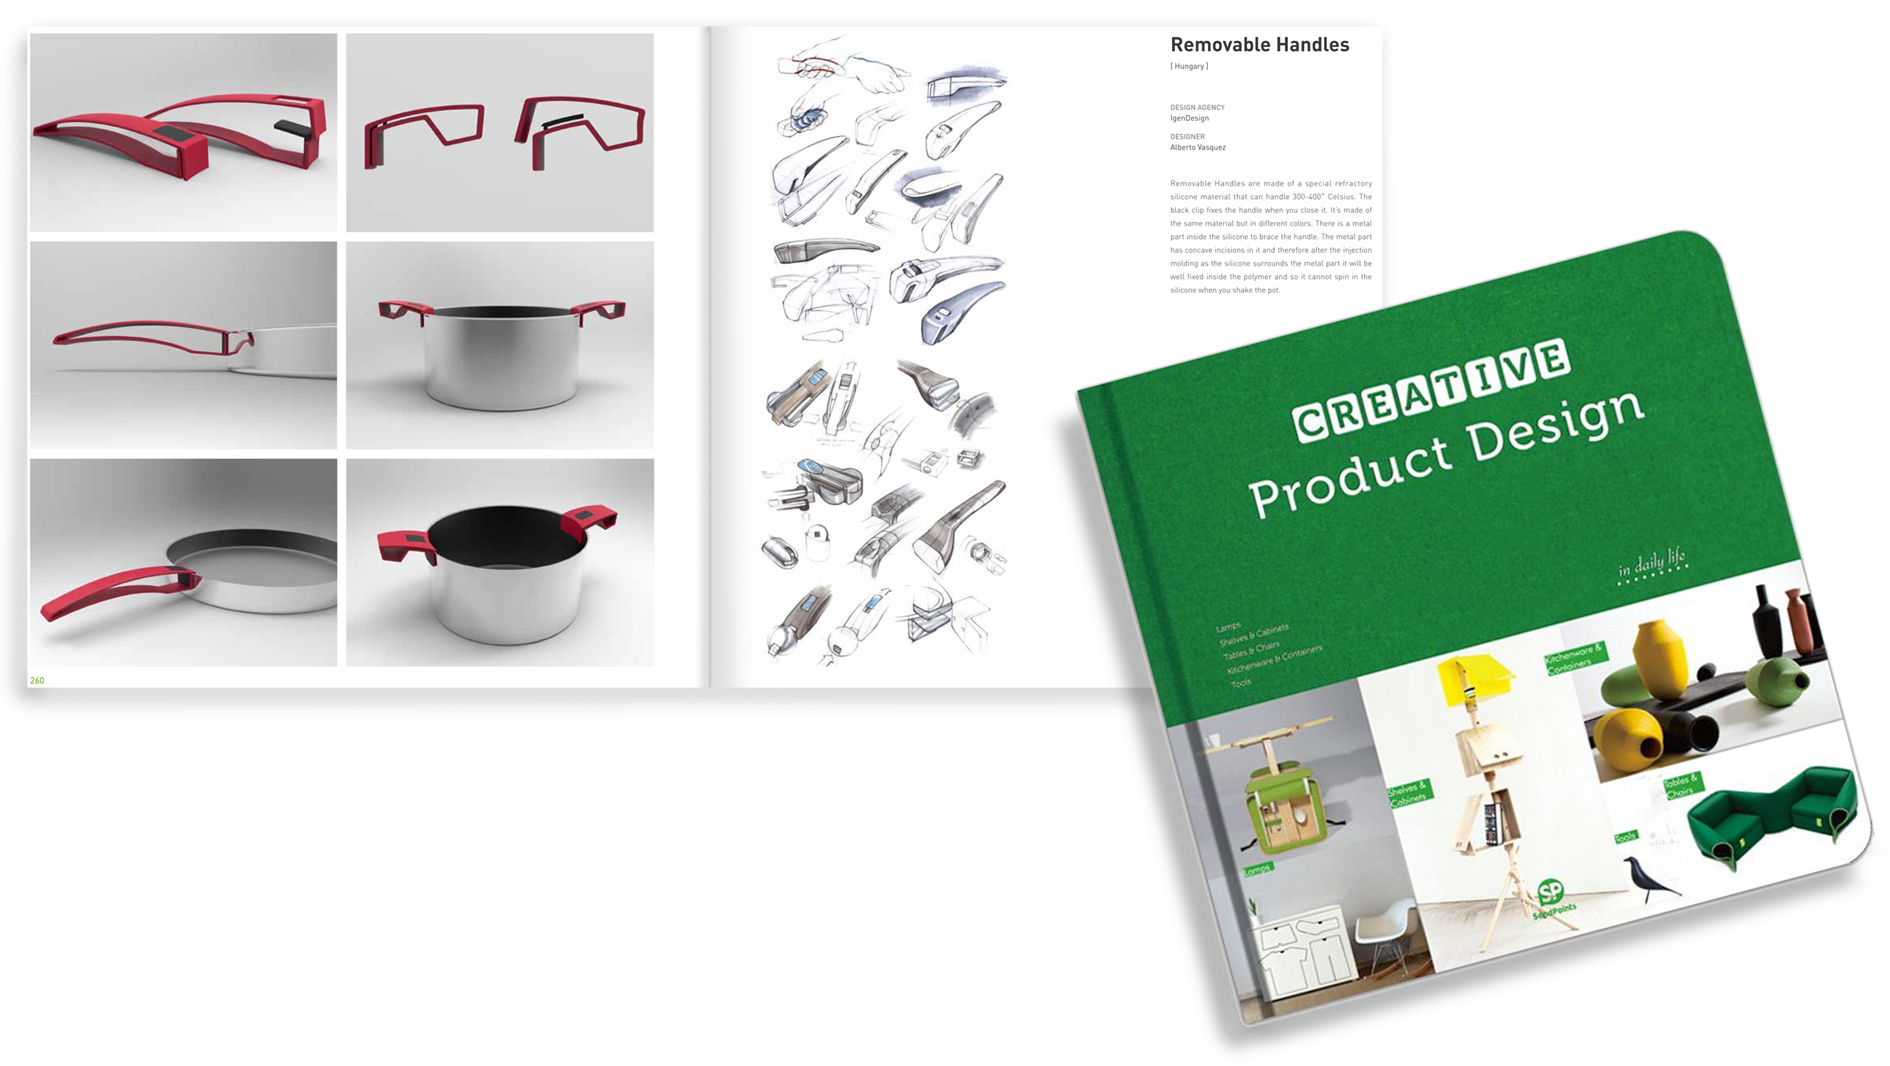  published in SendPoints inspiring book called Creative Product Design